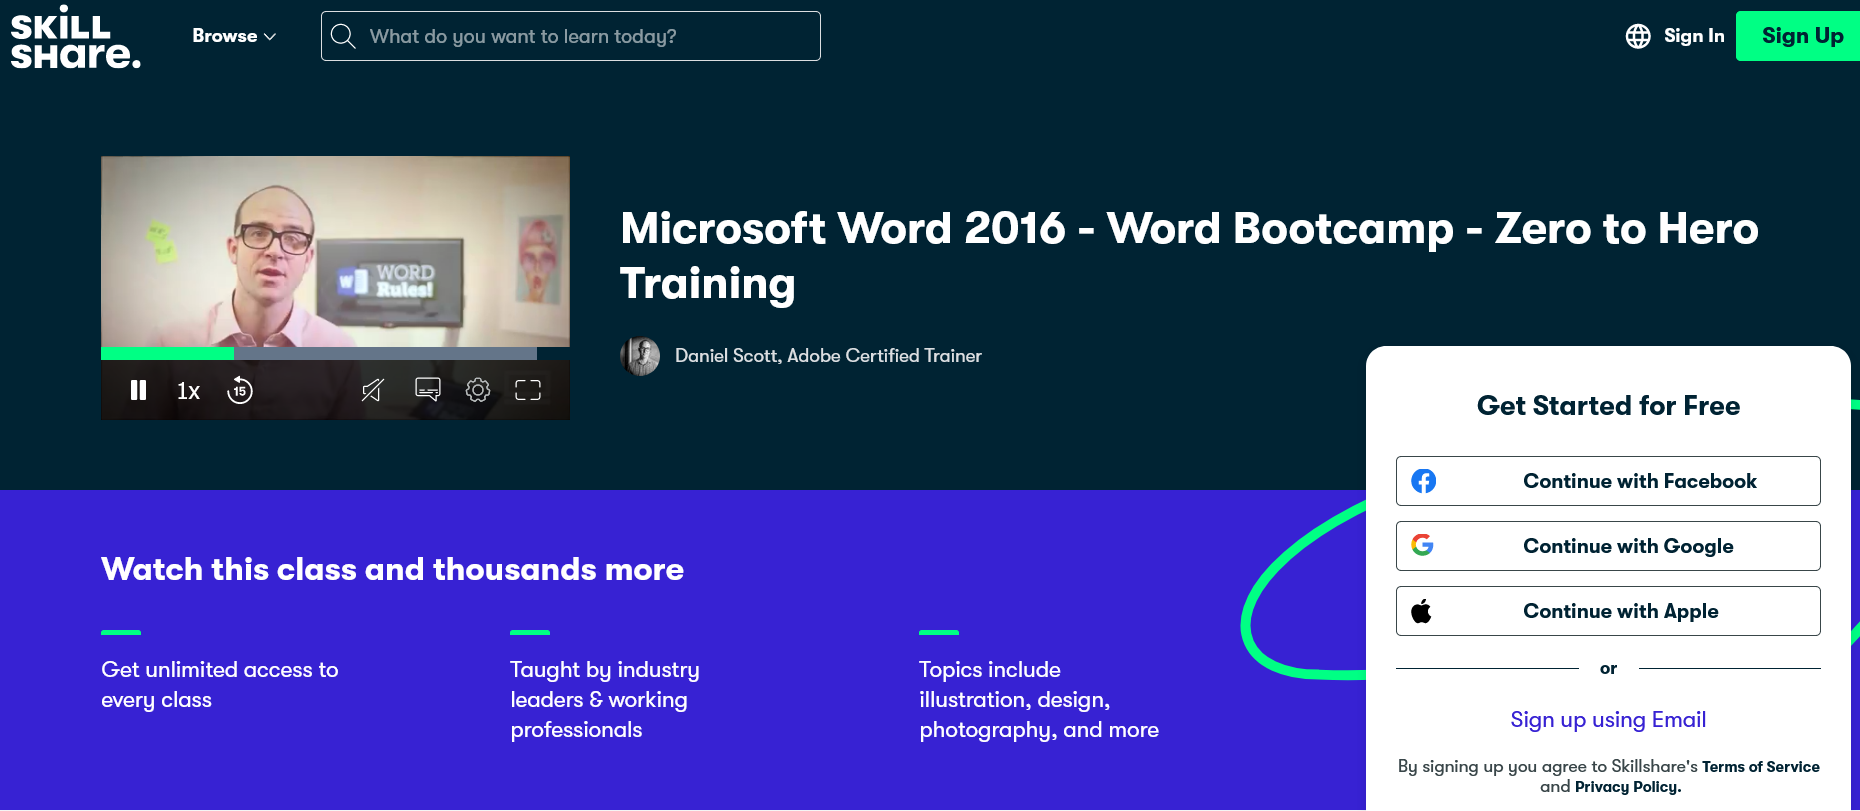 6 Best Microsoft Word Courses for Beginners for 2023 — Class Central